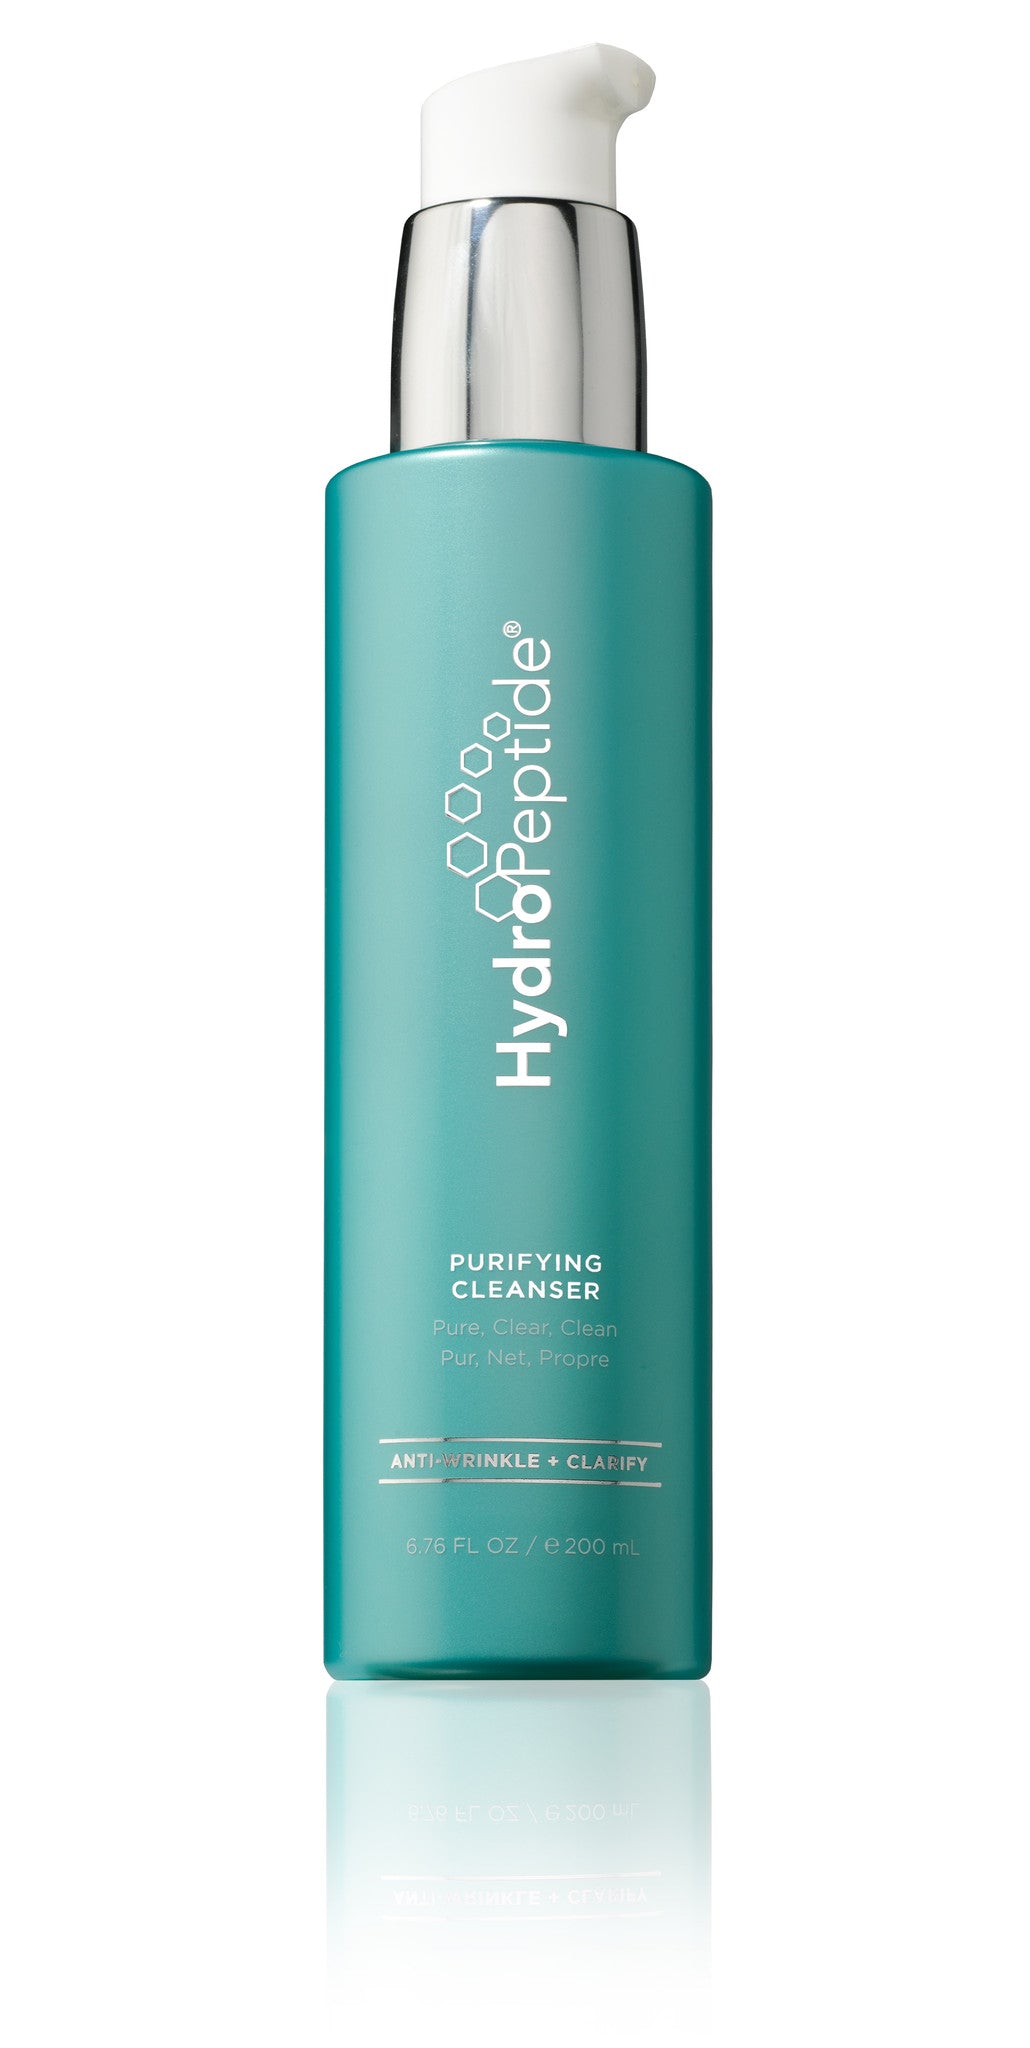 PURIFYING CLEANSER - Pure, Clear & Clean